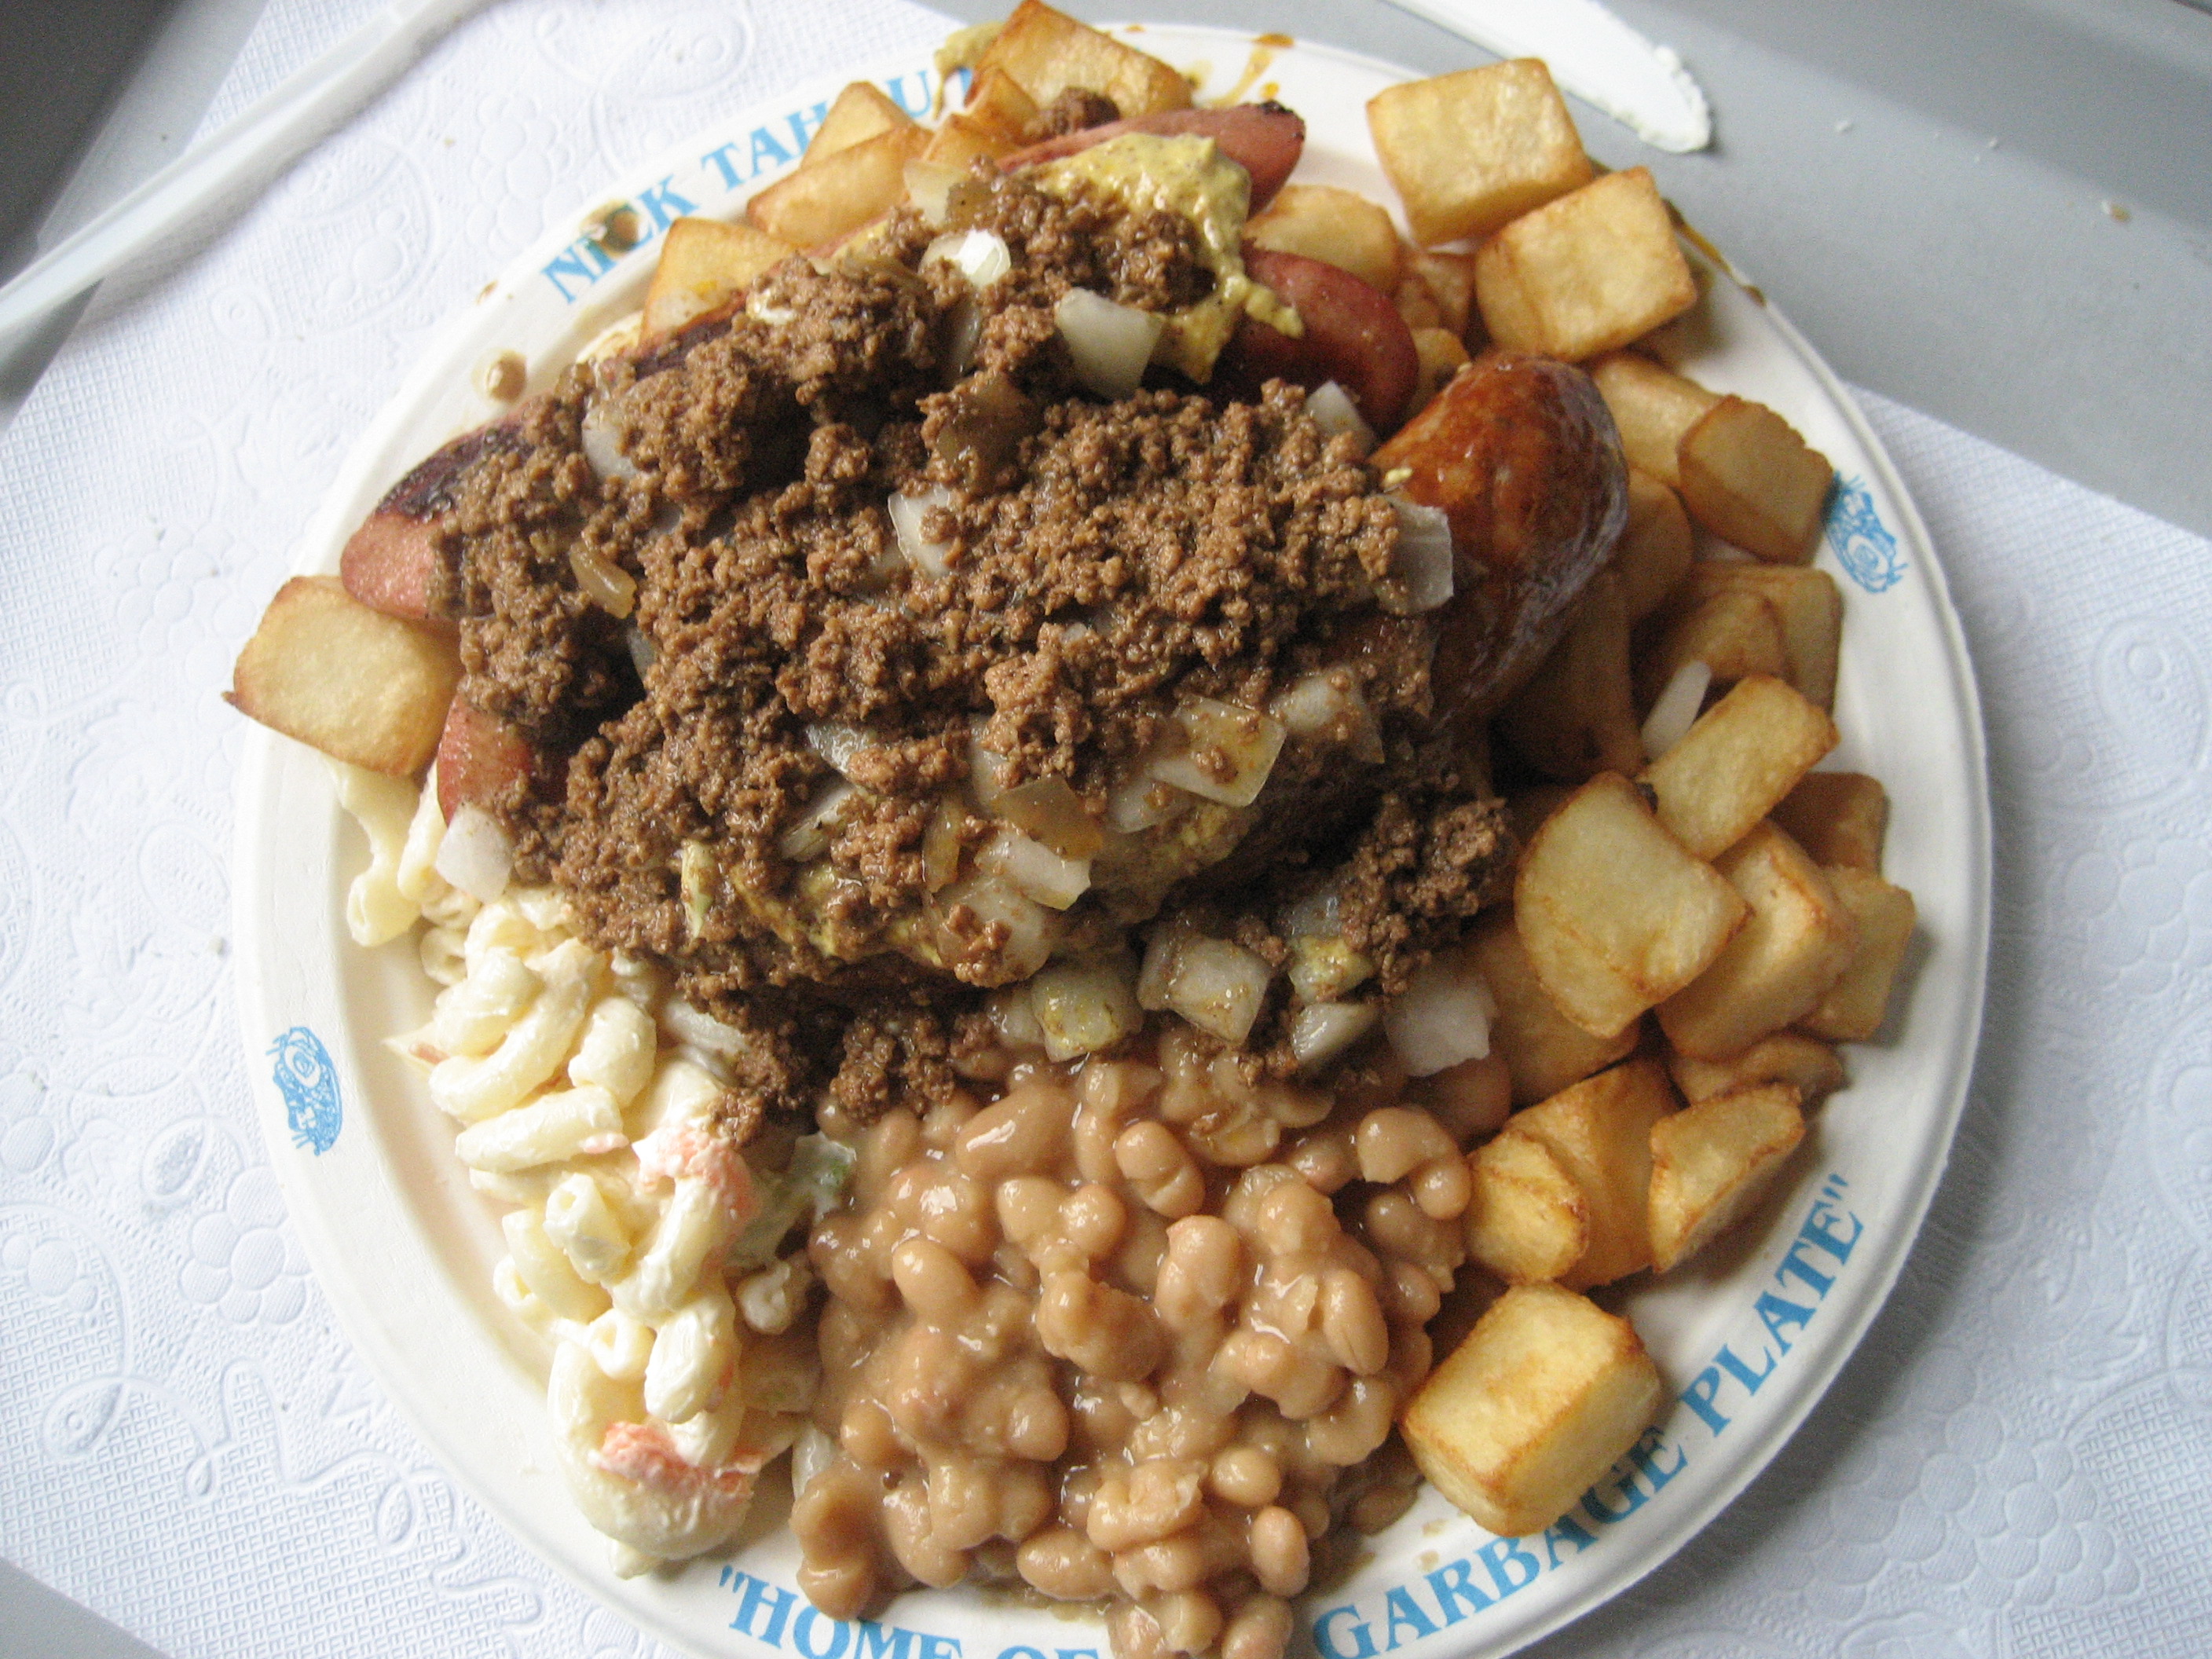 The garbage plate is a New York speciality